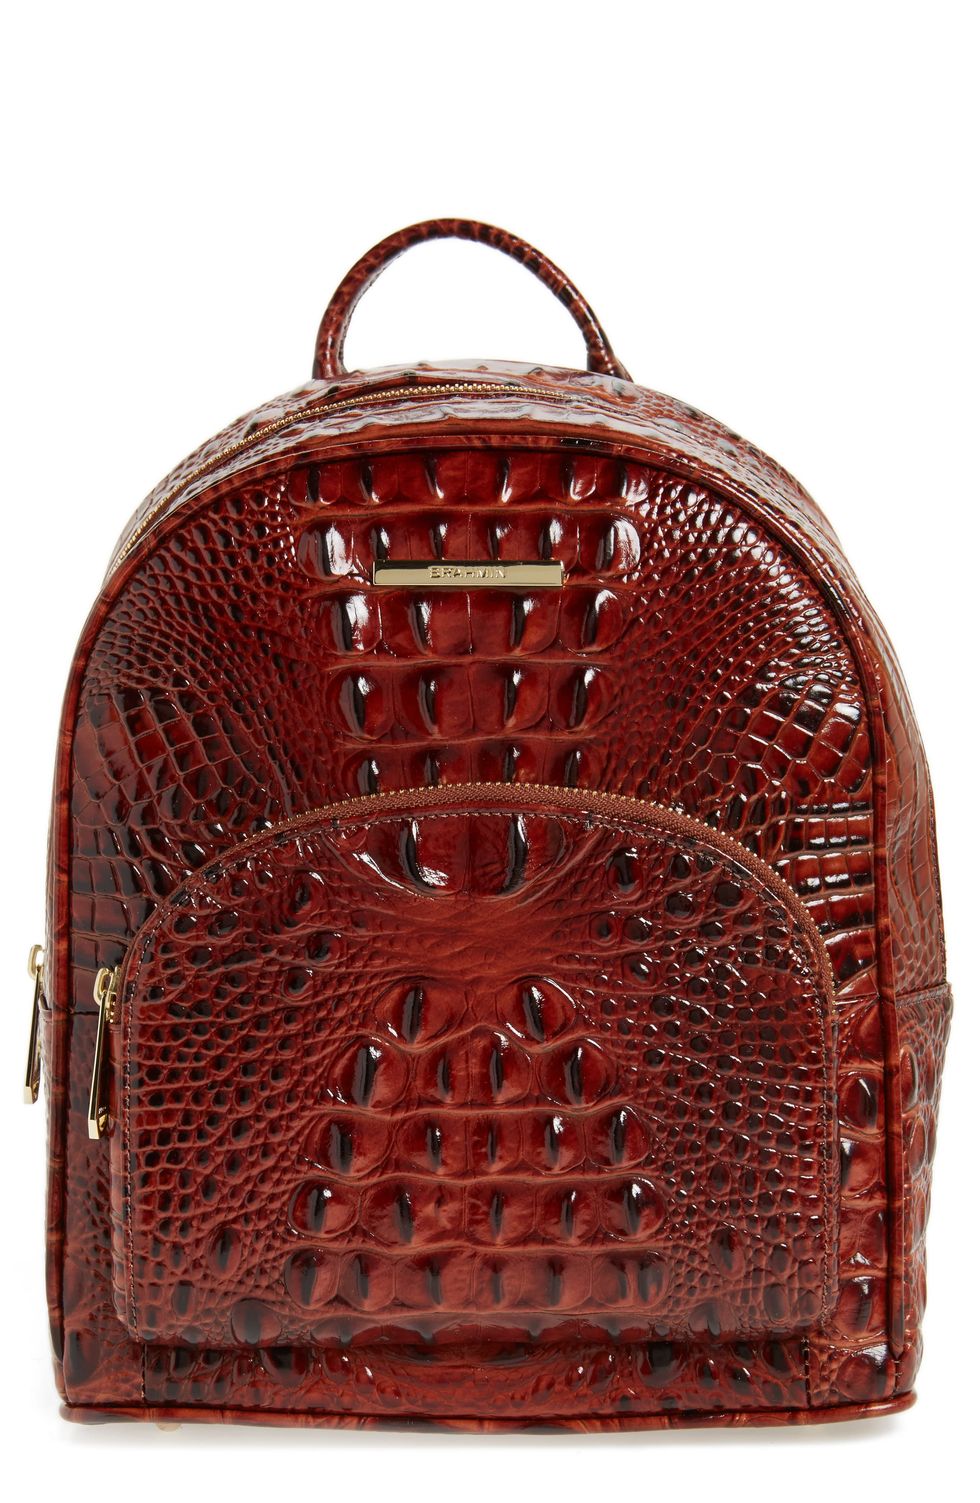 Best designer backpacks for women that are striking and stylish